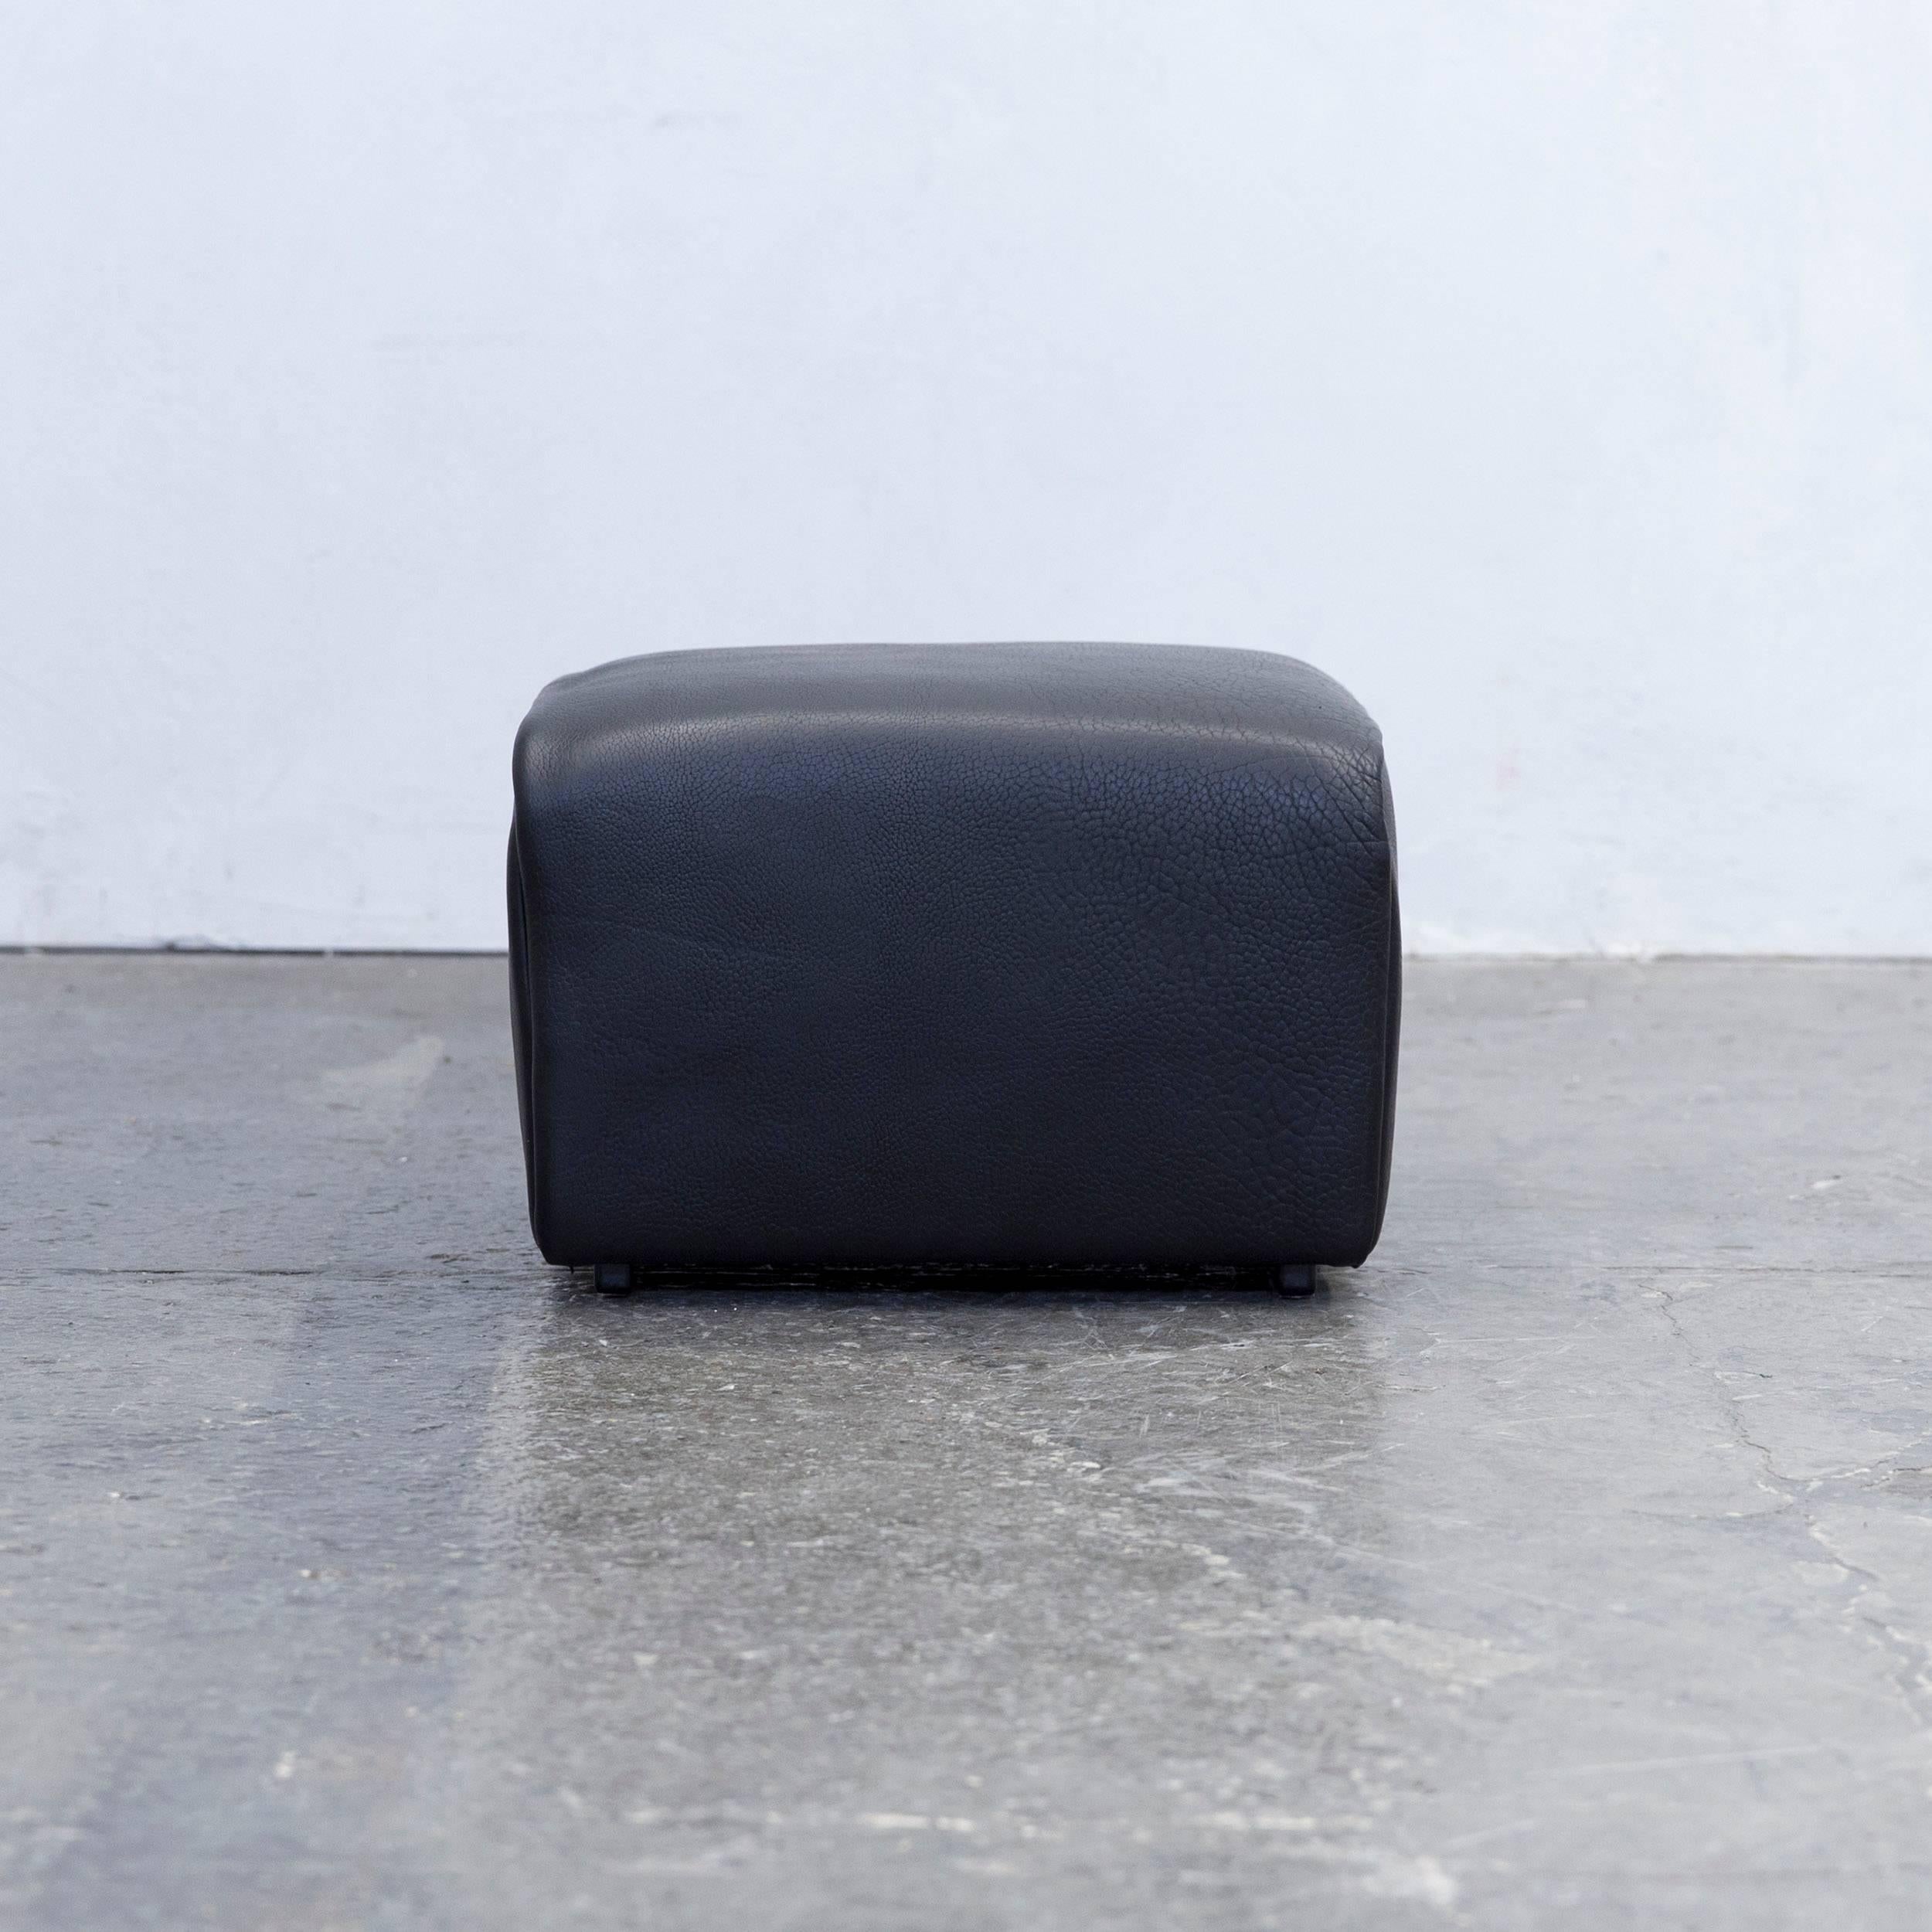 Black colored original De Sede DS 47 designer leather footstool in a minimalistic and modern design, made out of thick neck leather.